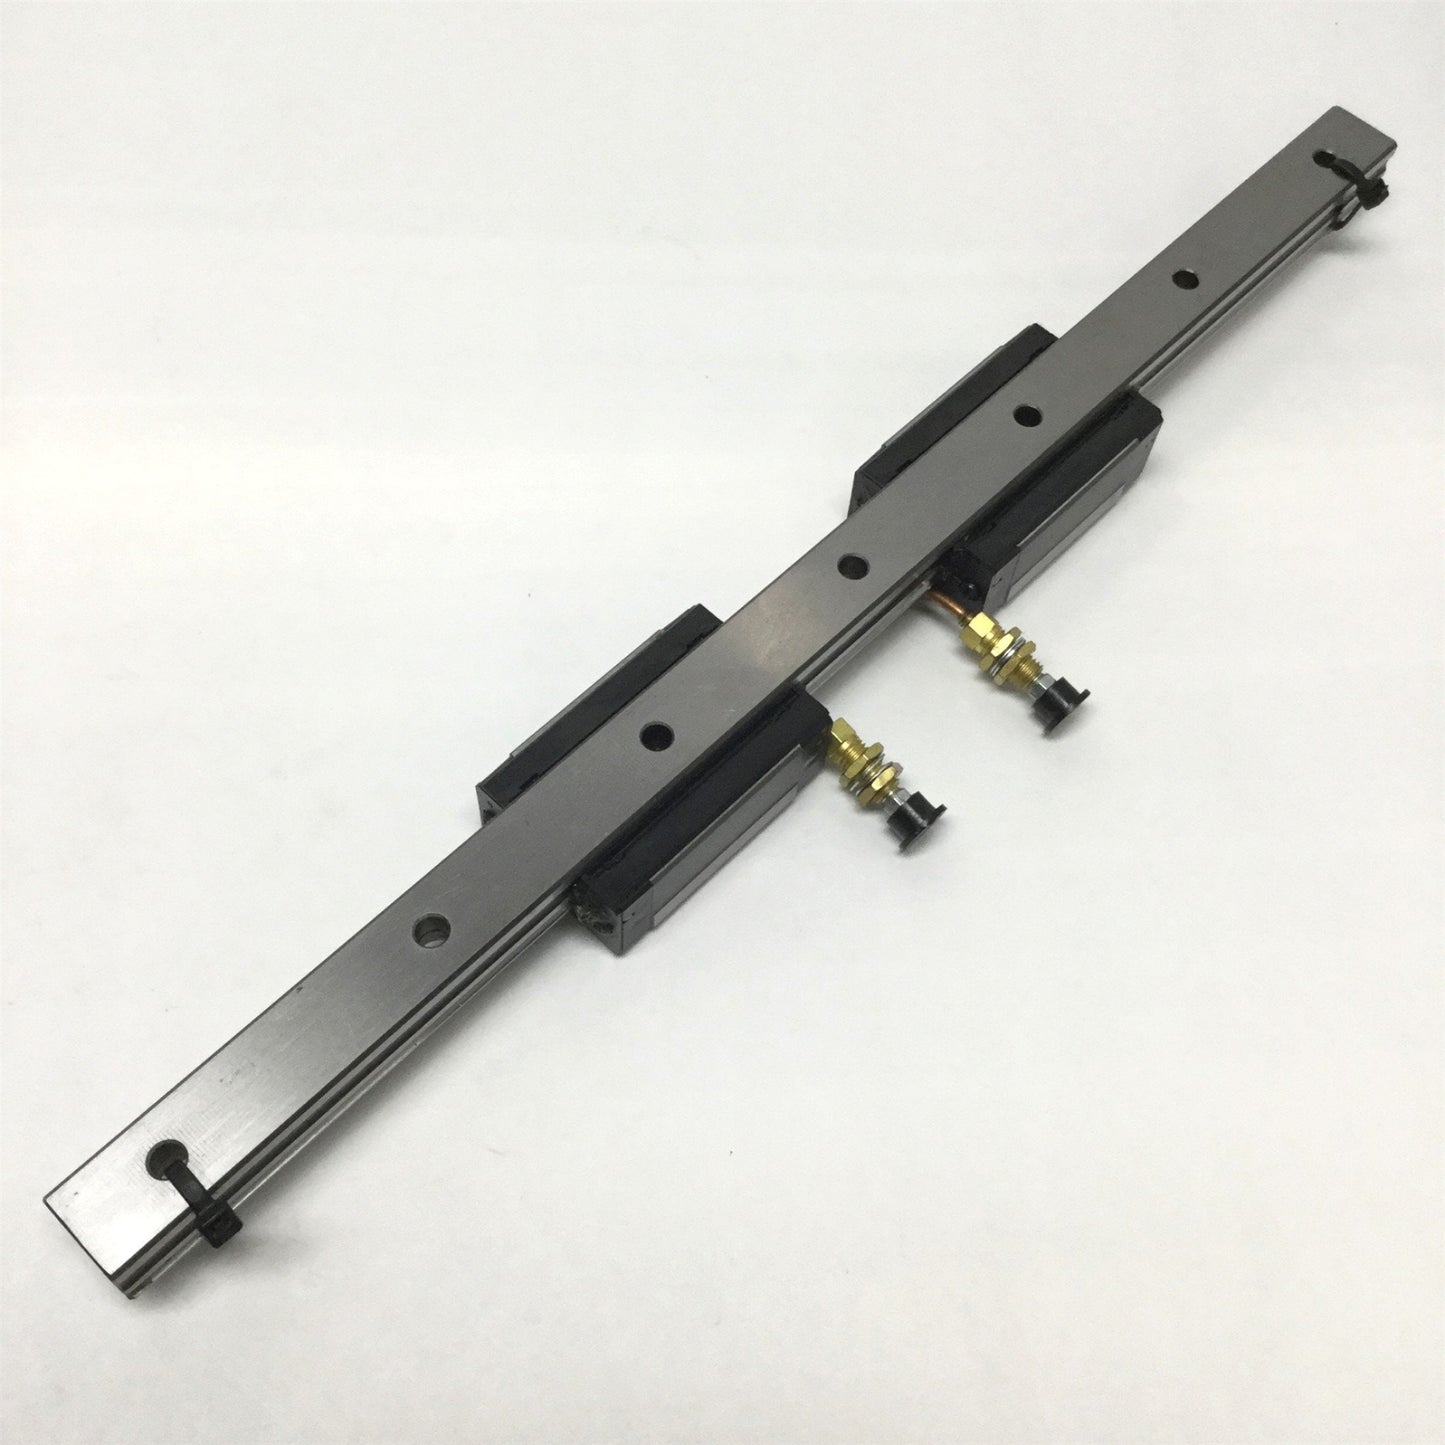 Used IKO LWES20 Precision Linear Ball Bearing Carriage Slides (2x) w/400mm Guide Rail